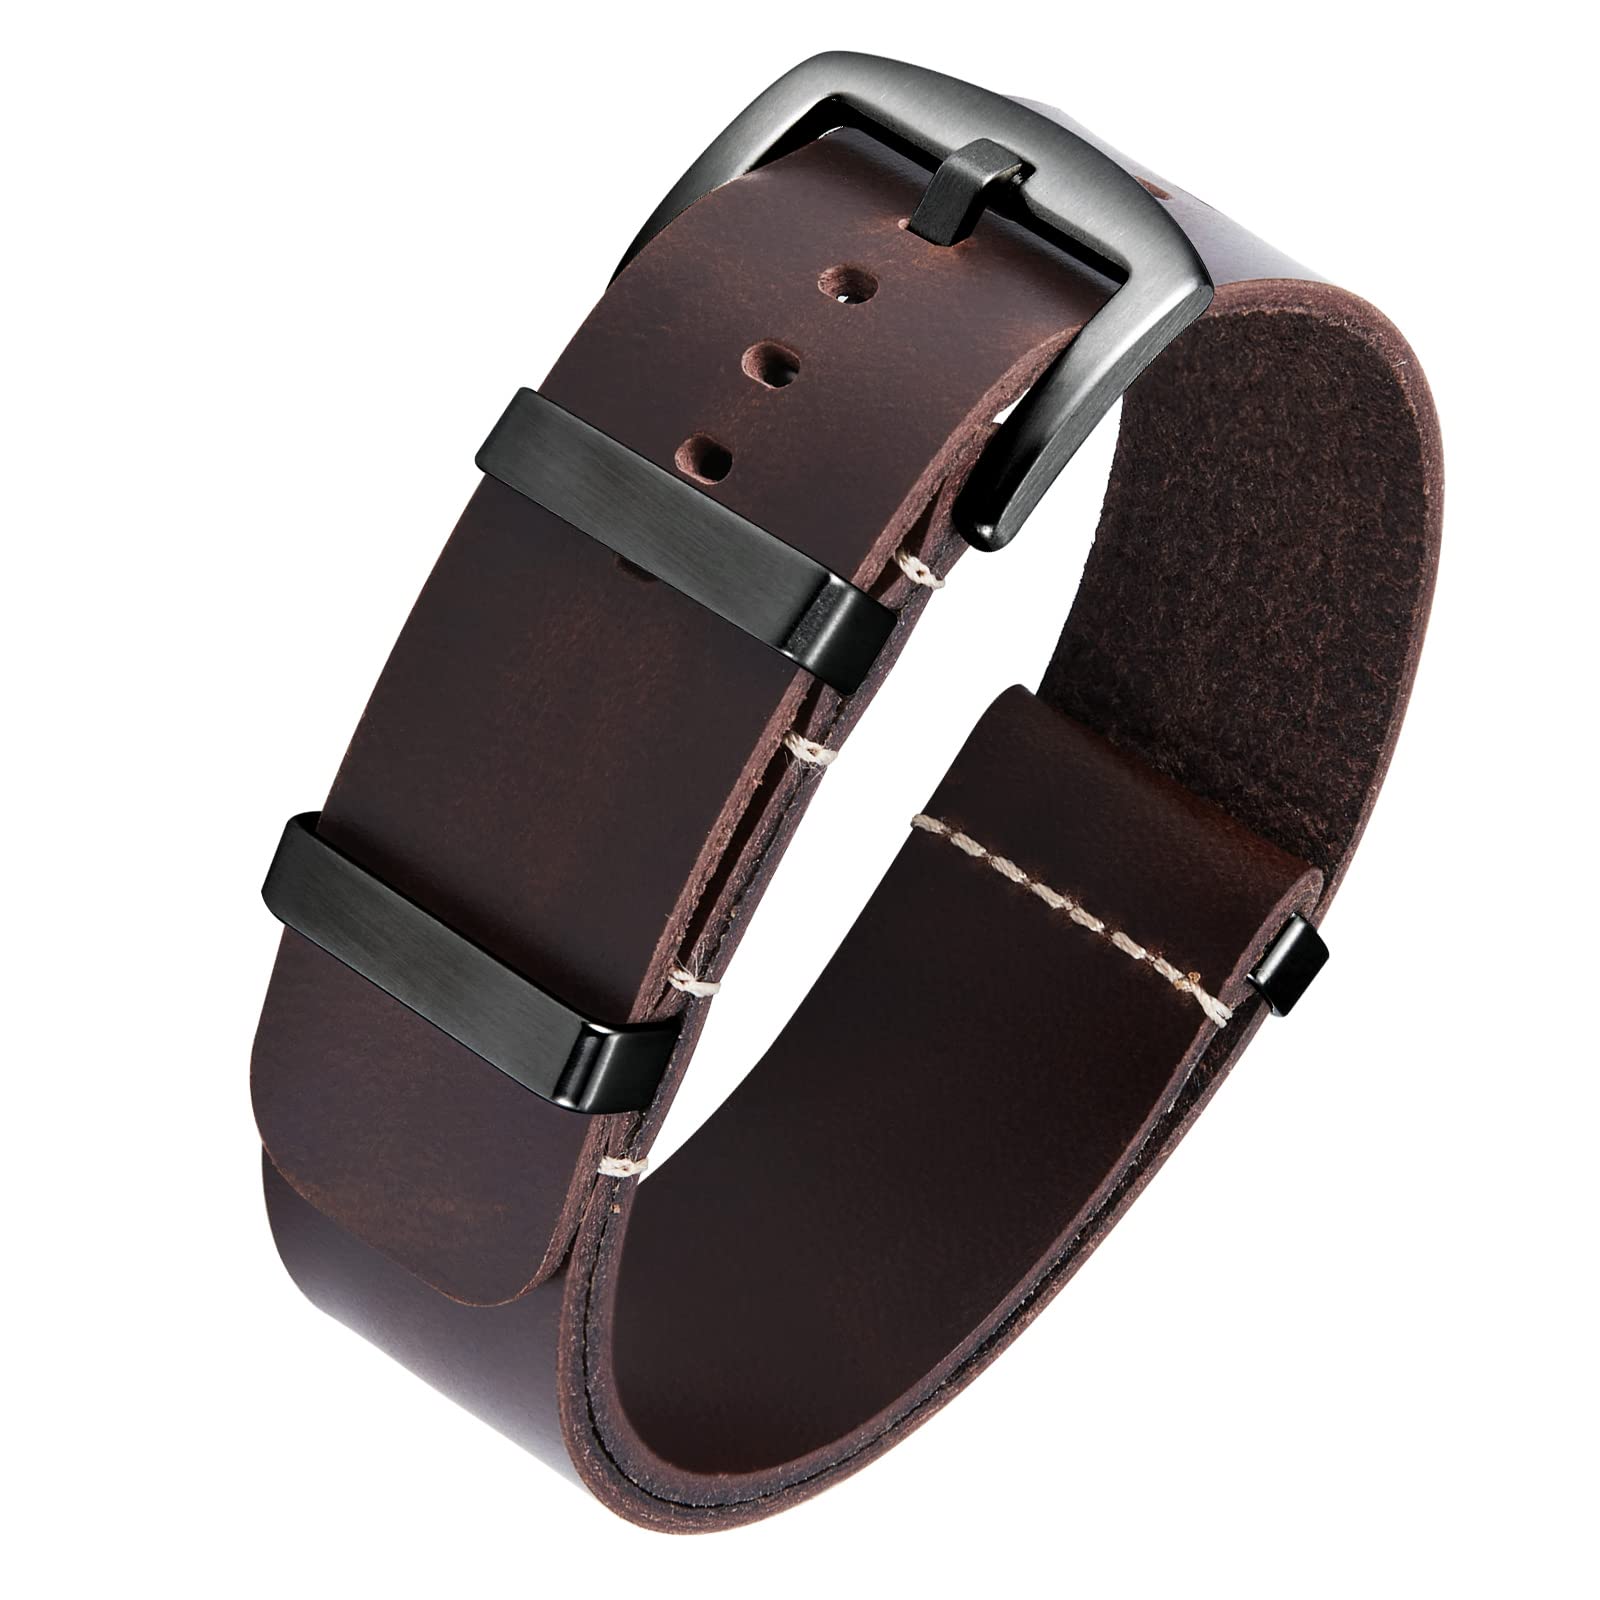 BINLUN Leather Watch Band Crazy Horse Oiled Leather Watch Straps 18mm 20mm 22mm 24mm Replacement One-Piece Watchbands for Men and Women Silver & Black Buckle